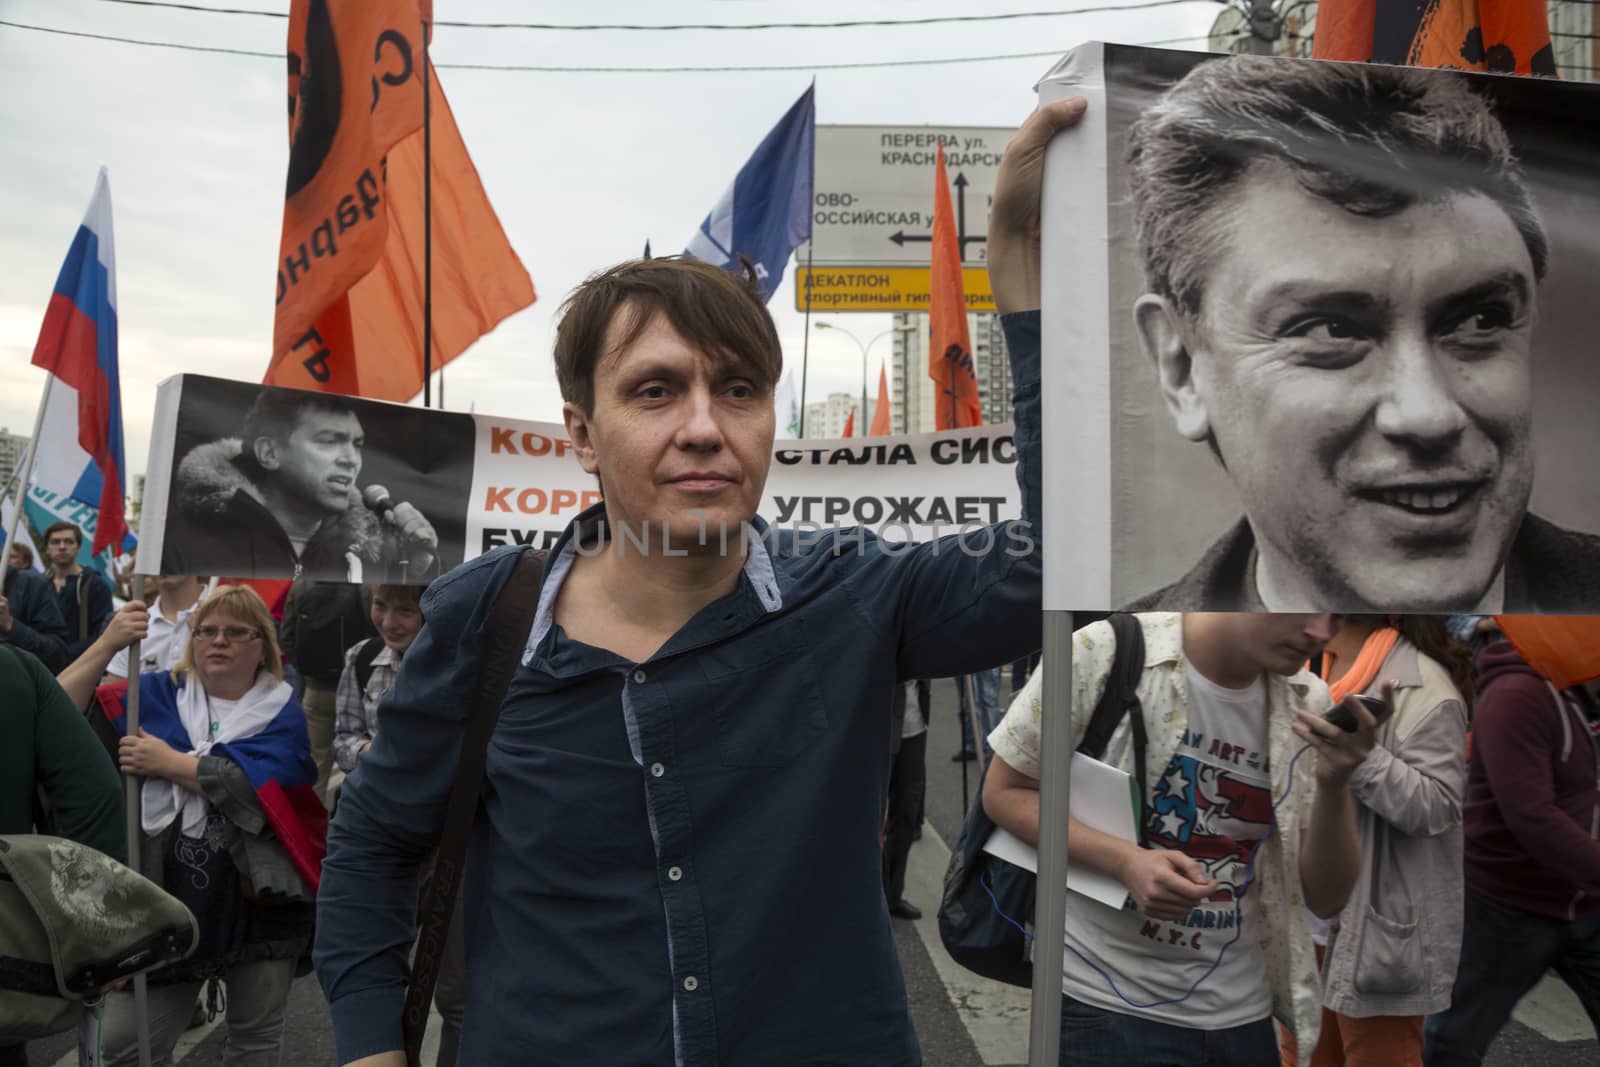 RUSSIA, Moscow: A man holds a photo of slain opposition politician Boris Nemstov as Russian opposition activists rallied in Moscow on September 20, 2015, in the wake of regional elections that widely favored the ruling United Russia party and prompted accusations of vote rigging. The Meeting to Change Power protest, organised by prominent anti-corruption campaigner Alexei Navalny, drew an estimated 2,000-4,000 people, well short of estimates in advance of the rally. 